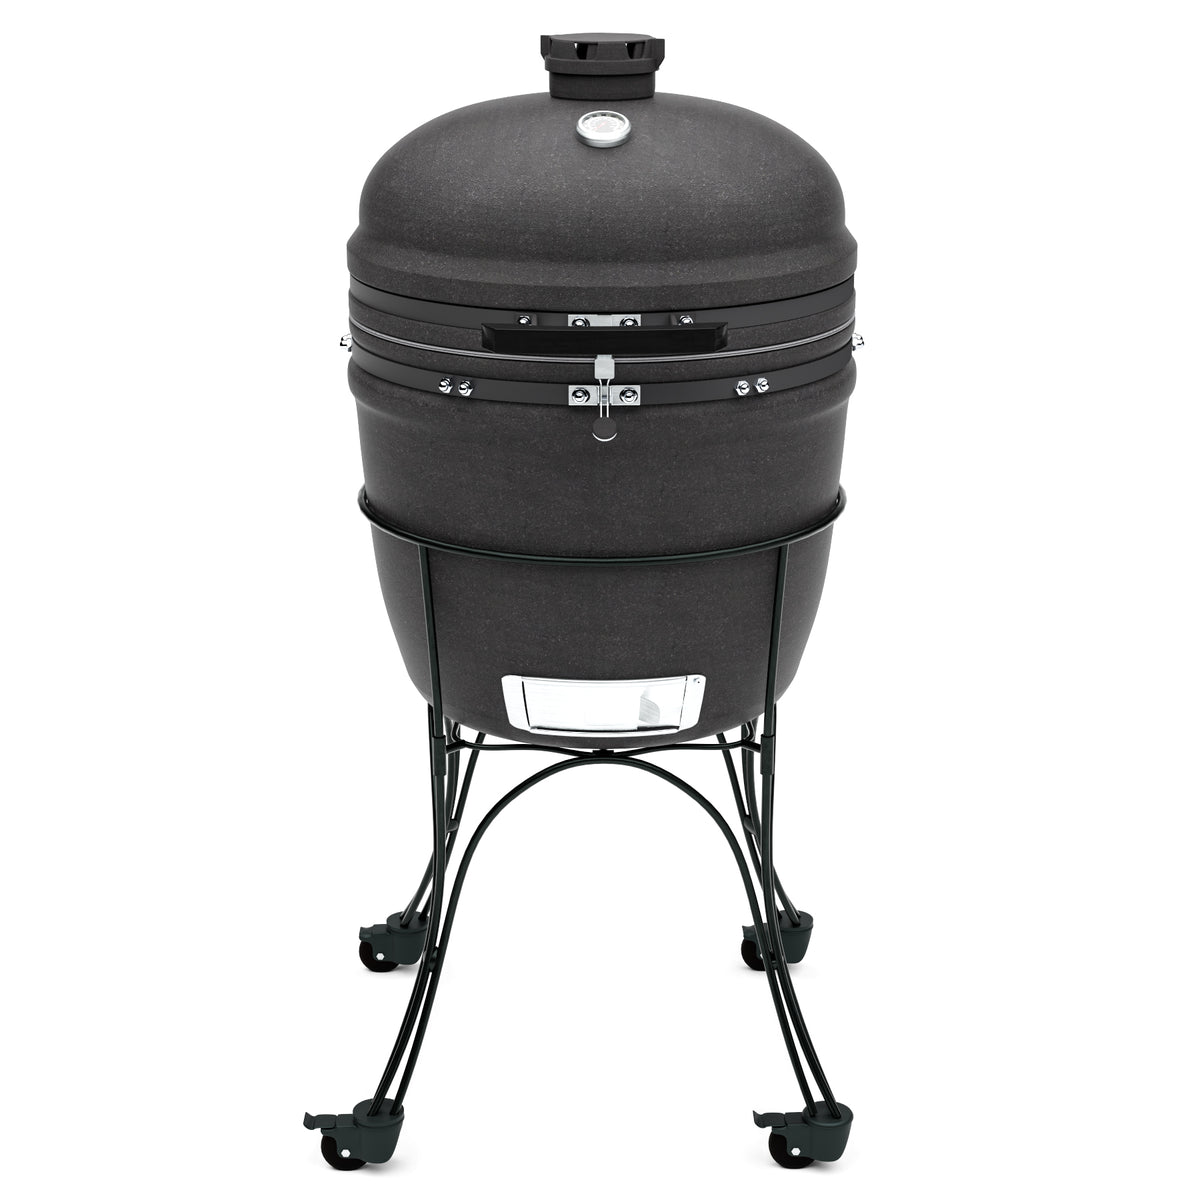 Draco Grills 22 Inch Kamado Grill with Wire Stand